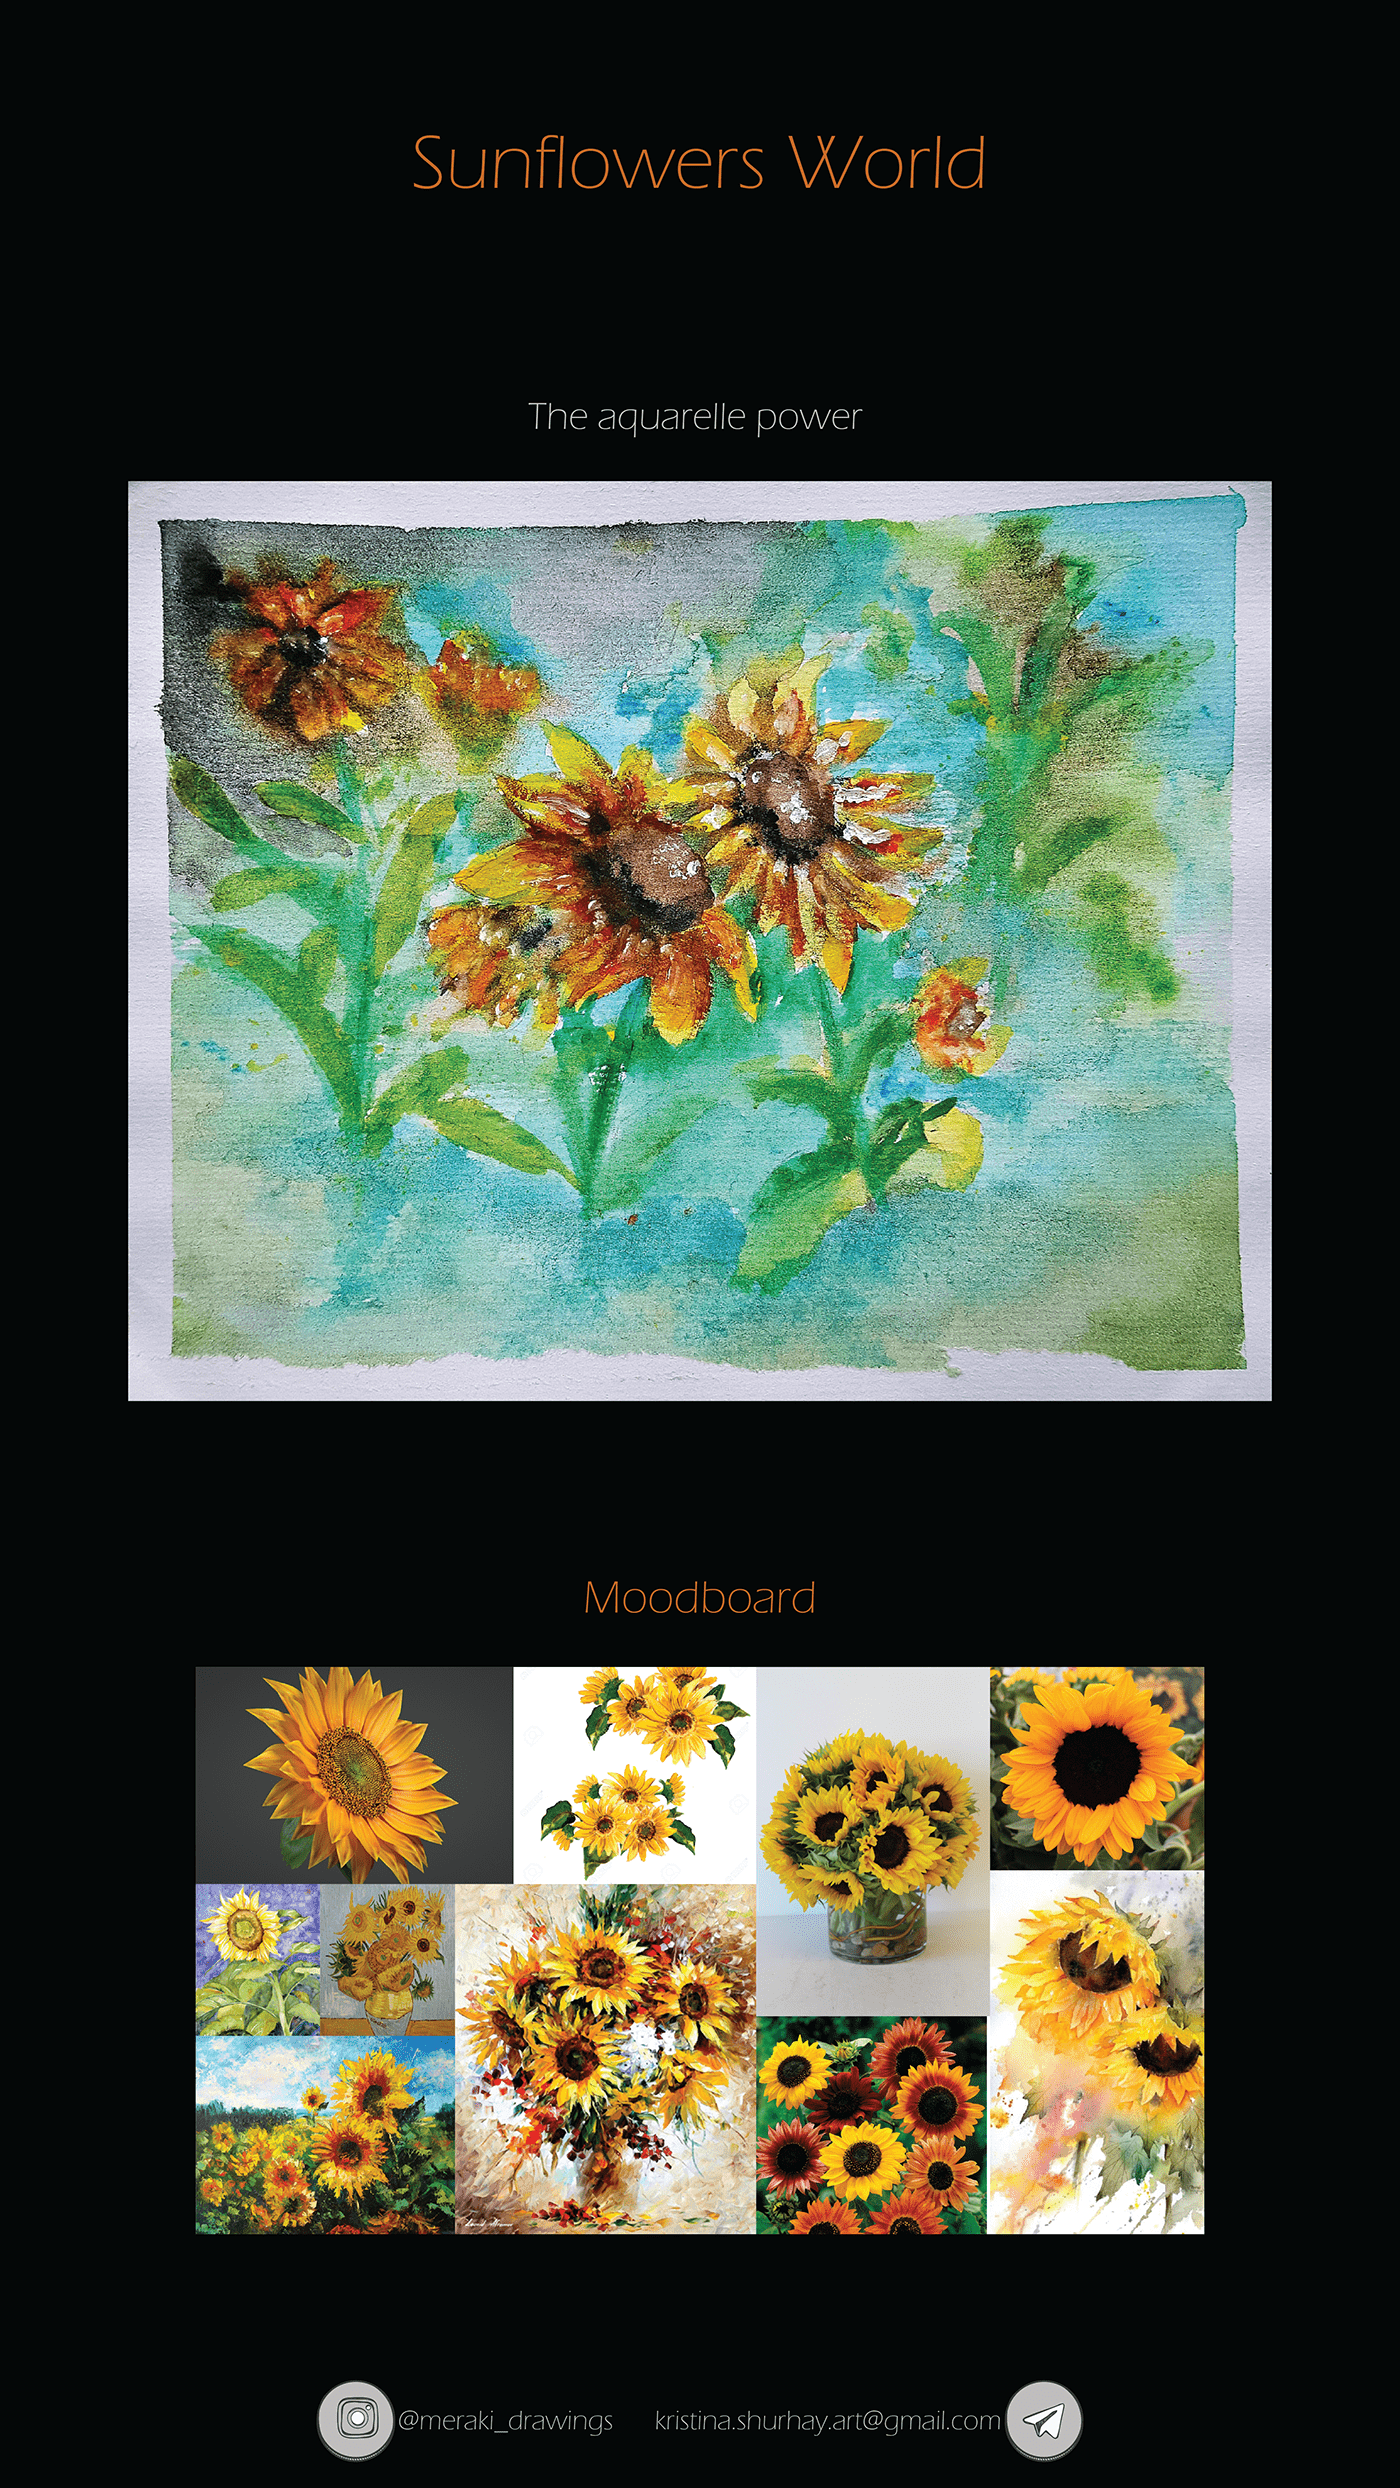 Sunflowers, watercolor and nature